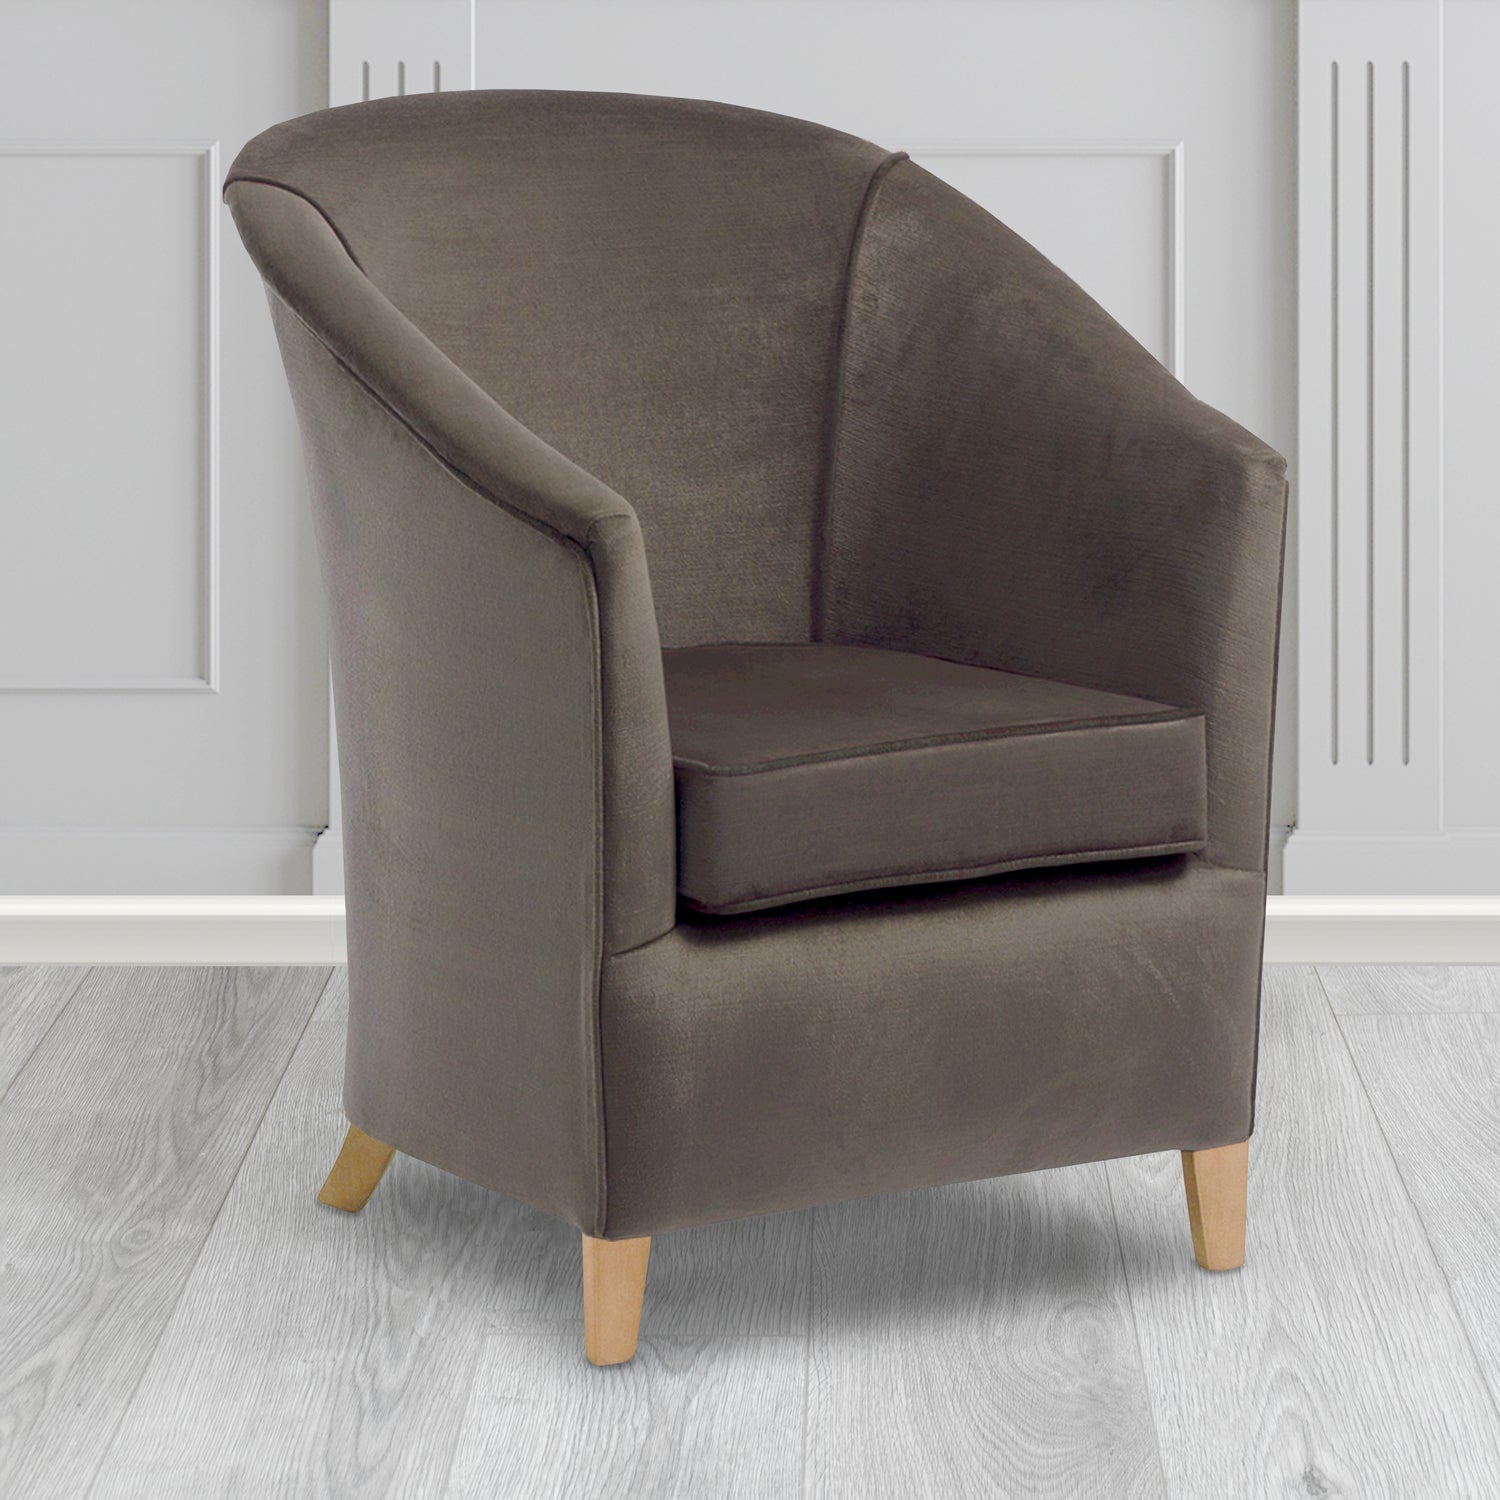 Bolton Tub Chair in Noble 956 Lead Crib 5 Velvet Fabric - Water Resistant - The Tub Chair Shop